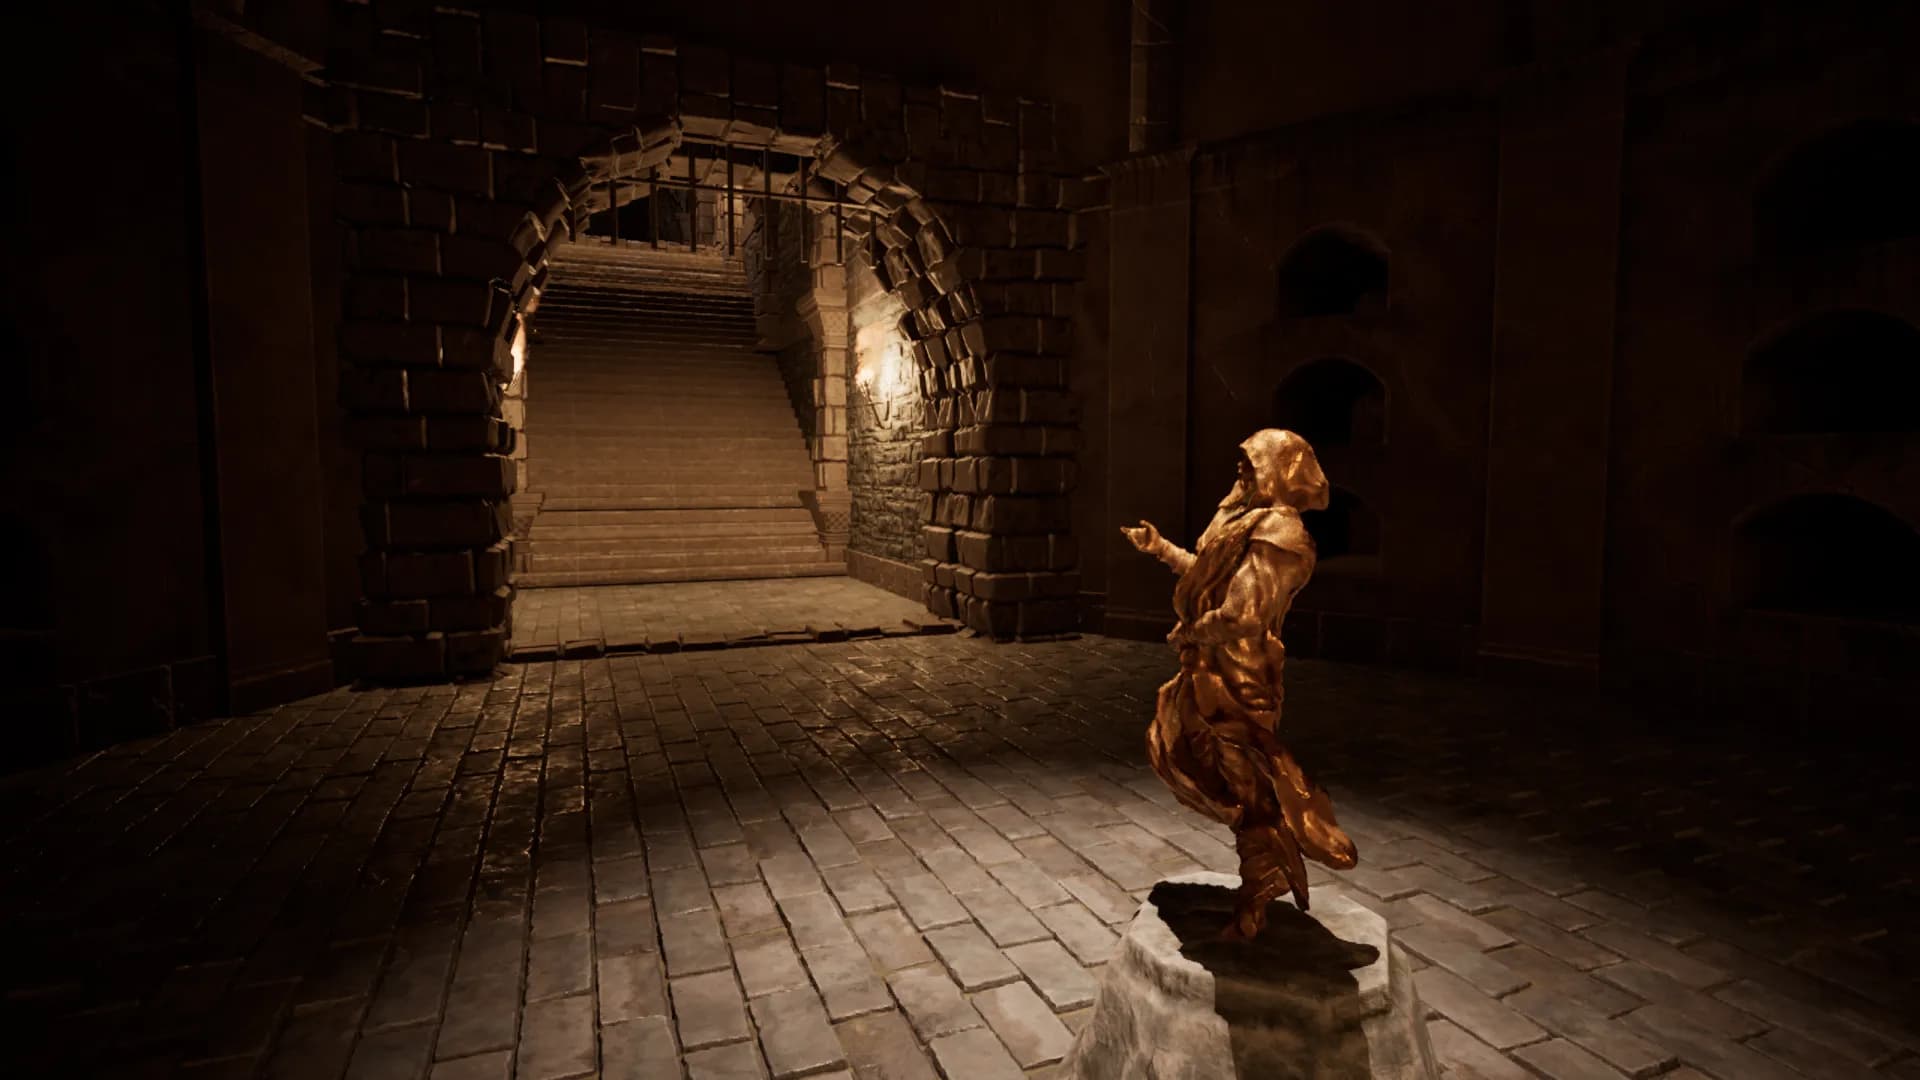 Screenshot 8: Treasure where picking up the statue will trigger the gate to go down, leaving the player unable to get out, unless something else can replace the statue in place